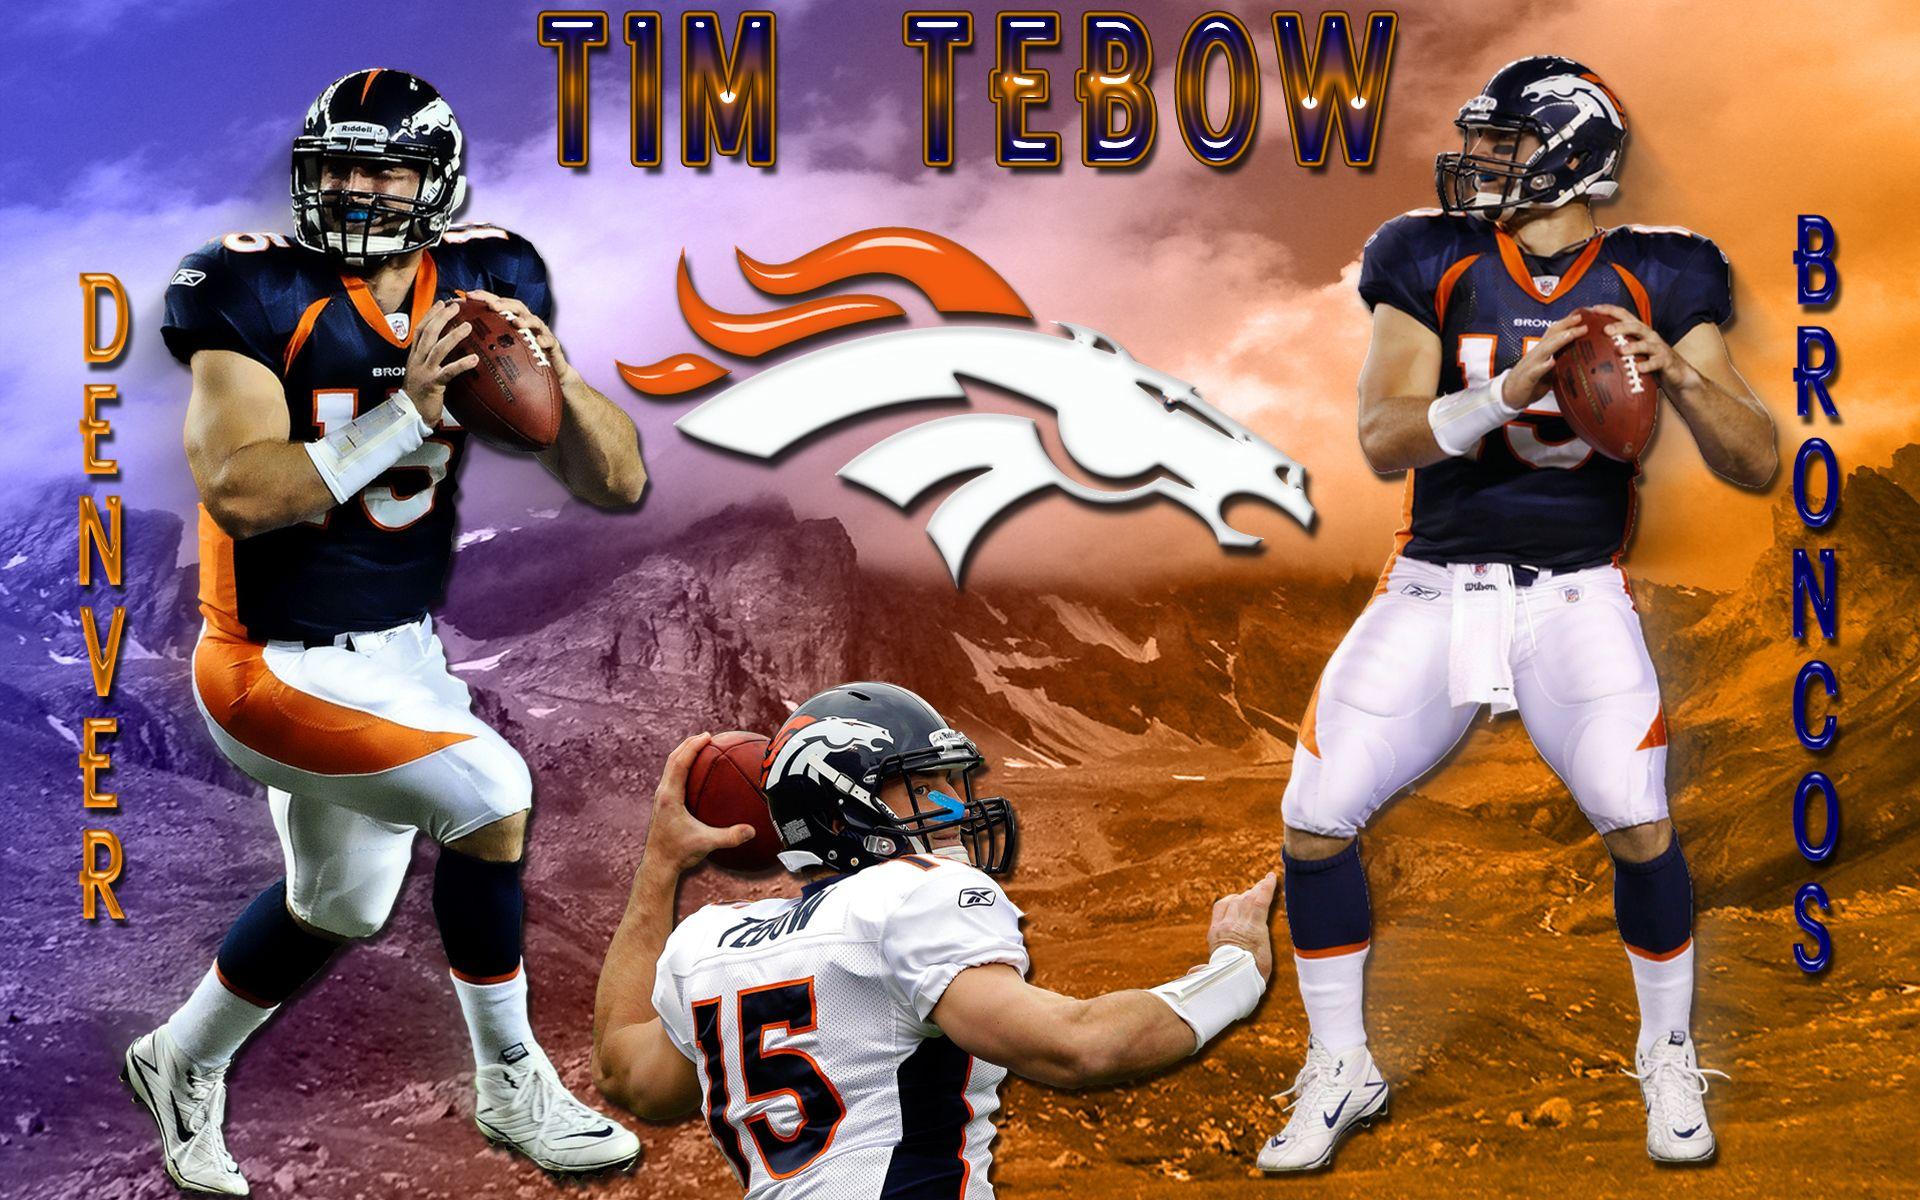 Wallpaper By Wicked Shadows: Tim Tebow Denver Broncos Wallpaper